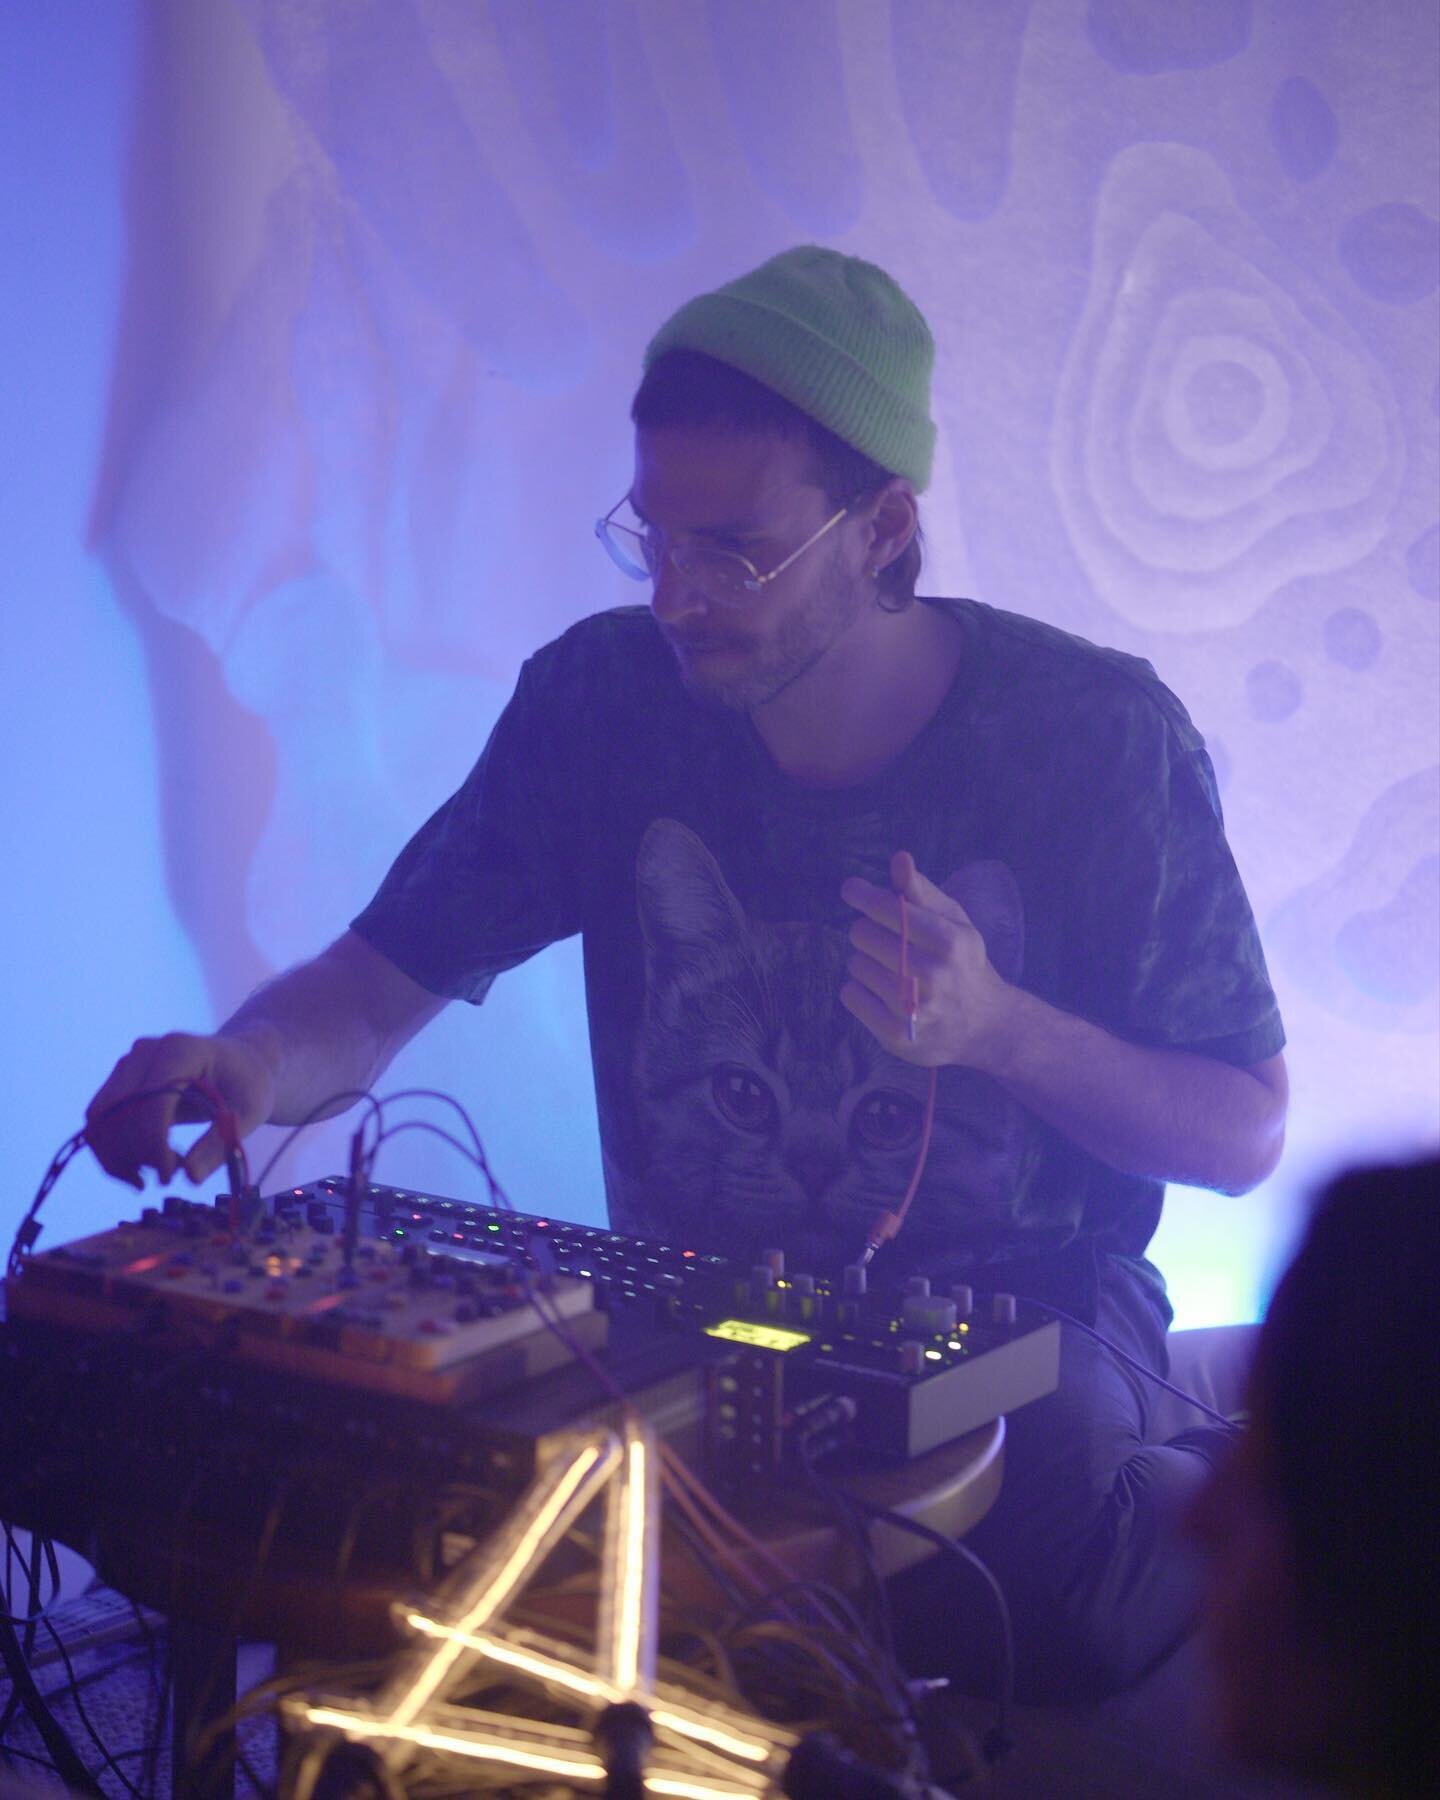 Amazingly rich and playful live set from @holybmusic